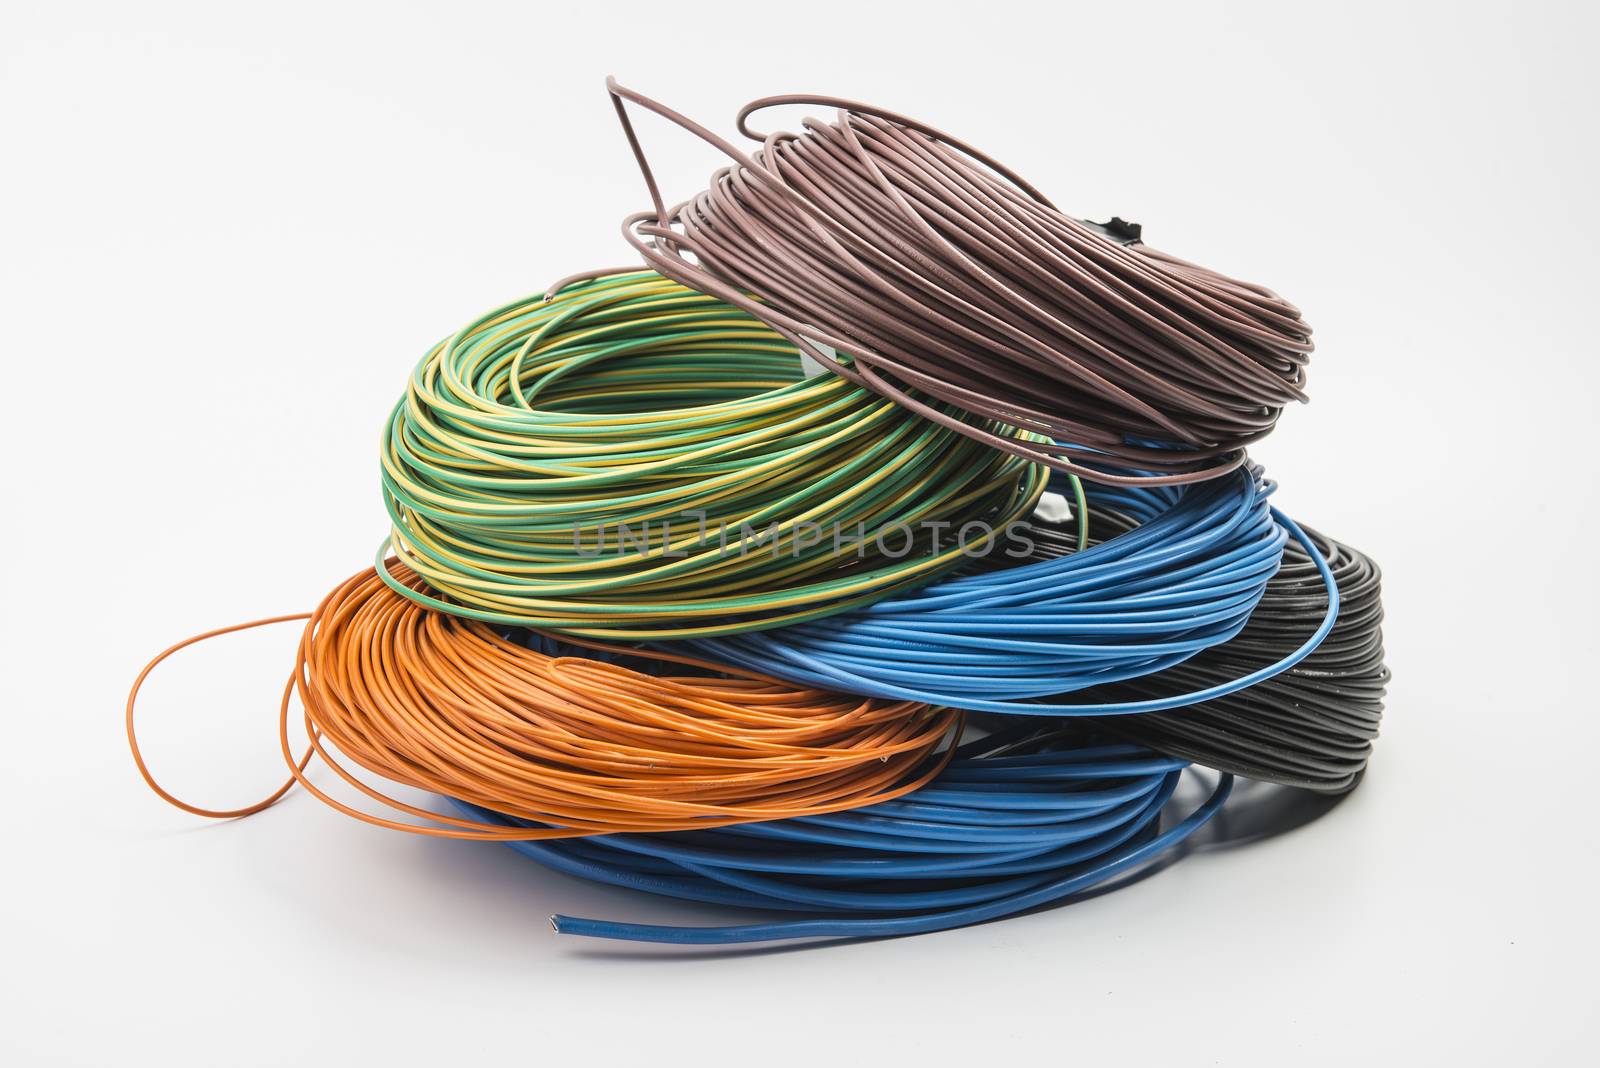 Skeins of electric cable on a white surface